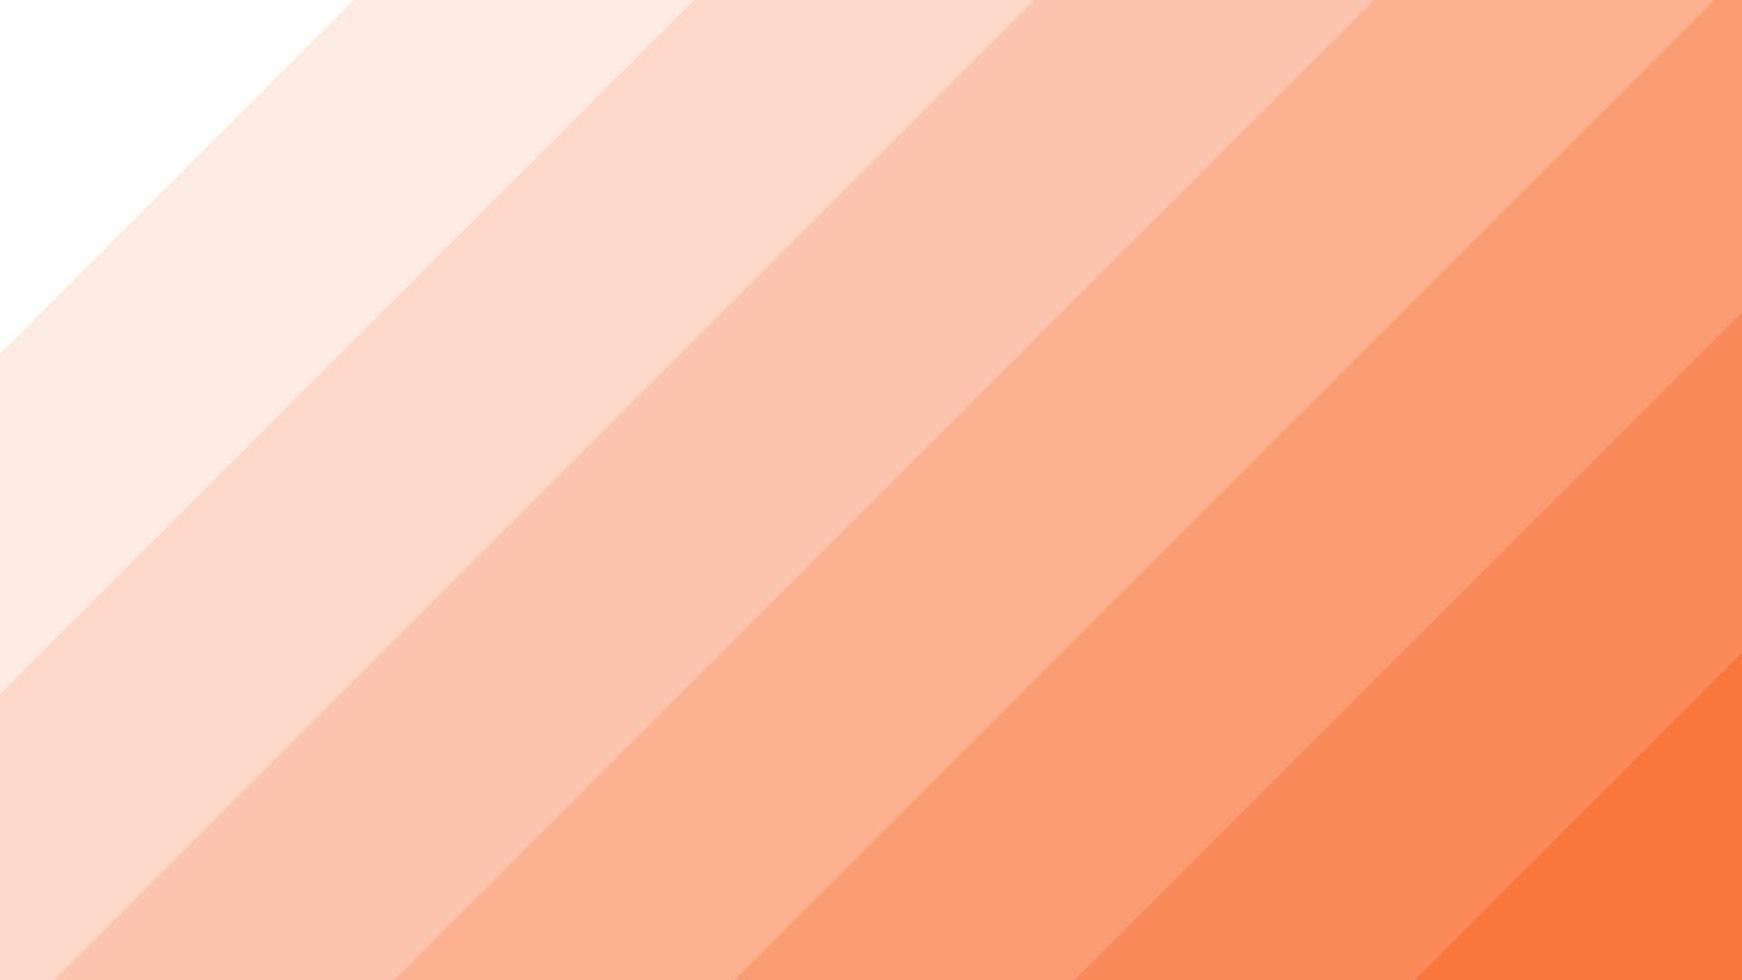 aesthetic abstract striped gradient orange blank frame wallpaper illustration, perfect for wallpaper, backdrop, postcard, background, banner